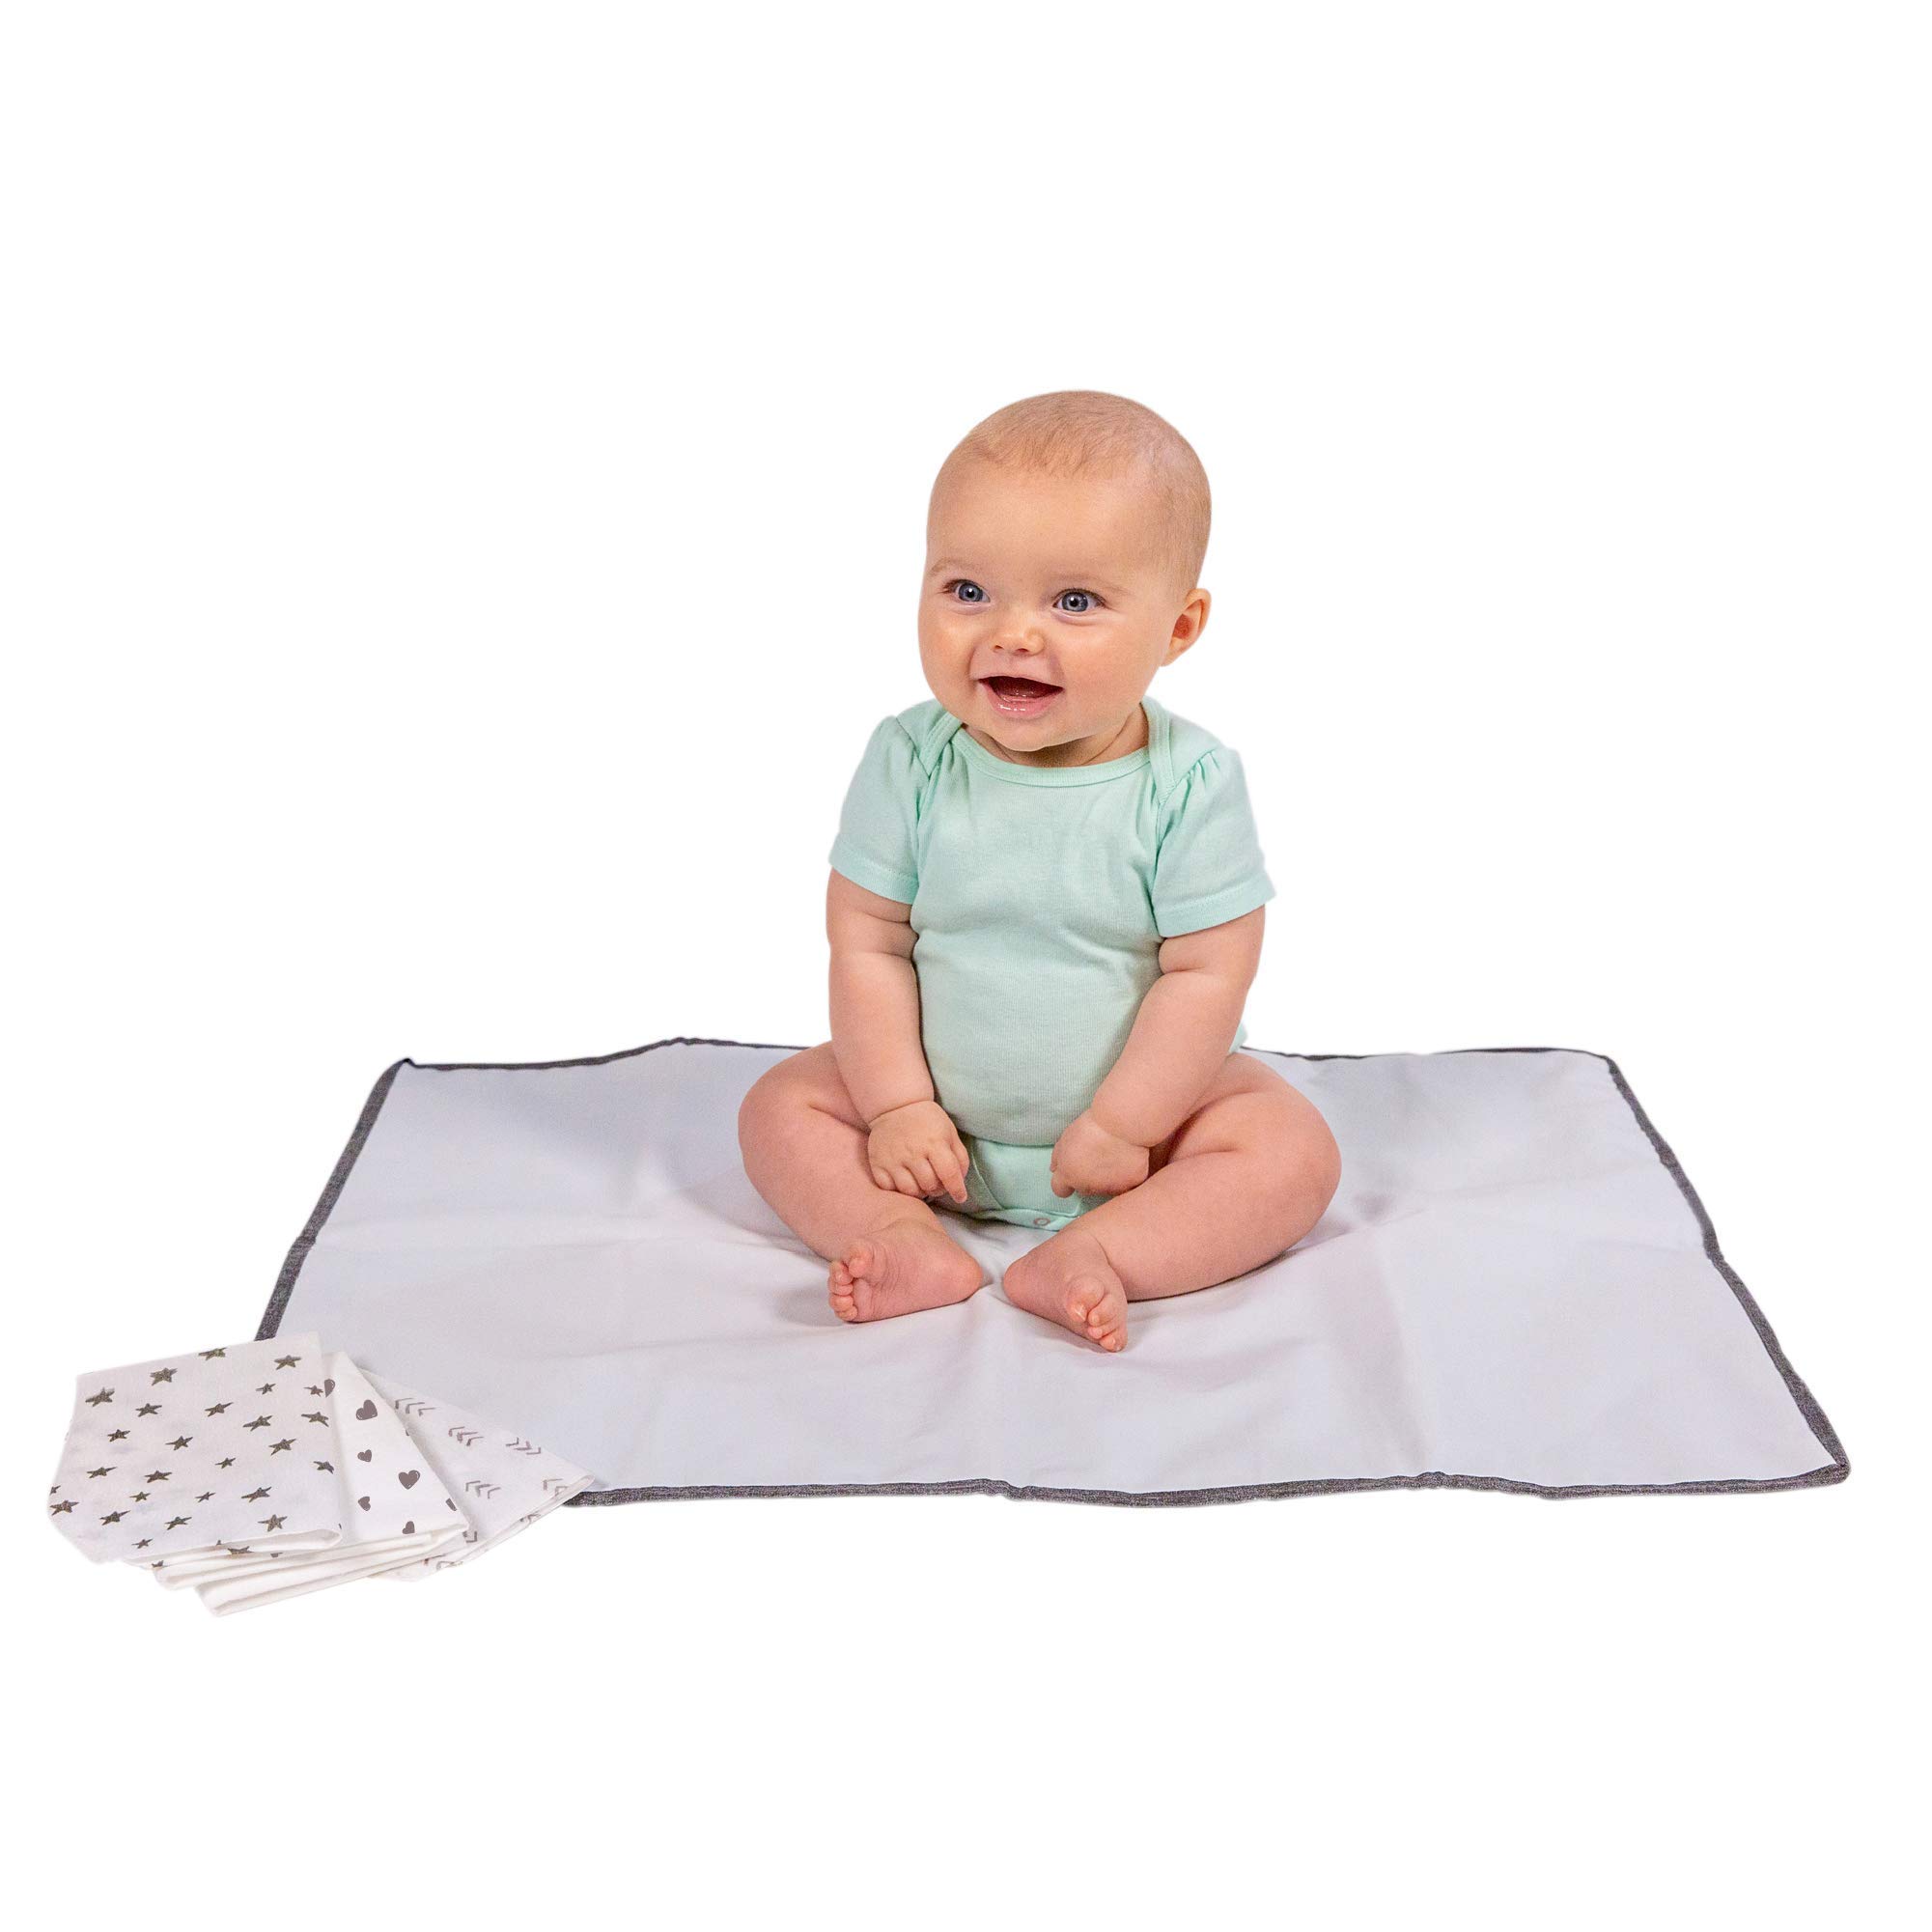 Healthy Habits by J.L. Childress Changing Pad Bundle, Grey - Includes a Portable Padded Diaper Changing Pad Plus 3 Disposable Changing Pads for Baby